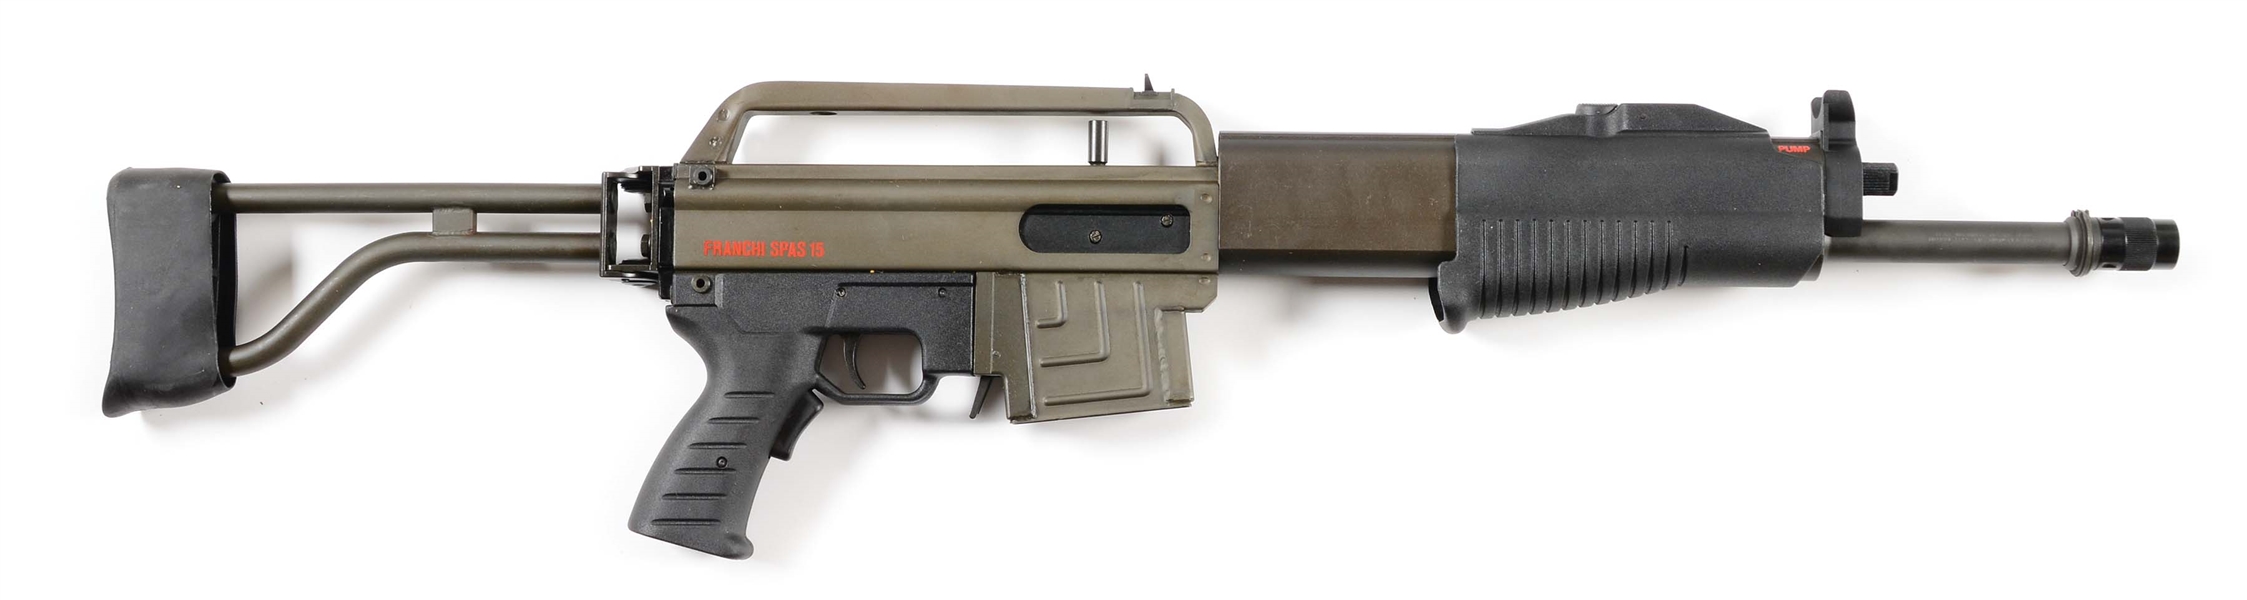 (M) FINE AND RARE FRANCHI SPAS 15 DUAL FUNCTION SLIDE ACTION AND SEMI-AUTOMATIC SHOTGUN.